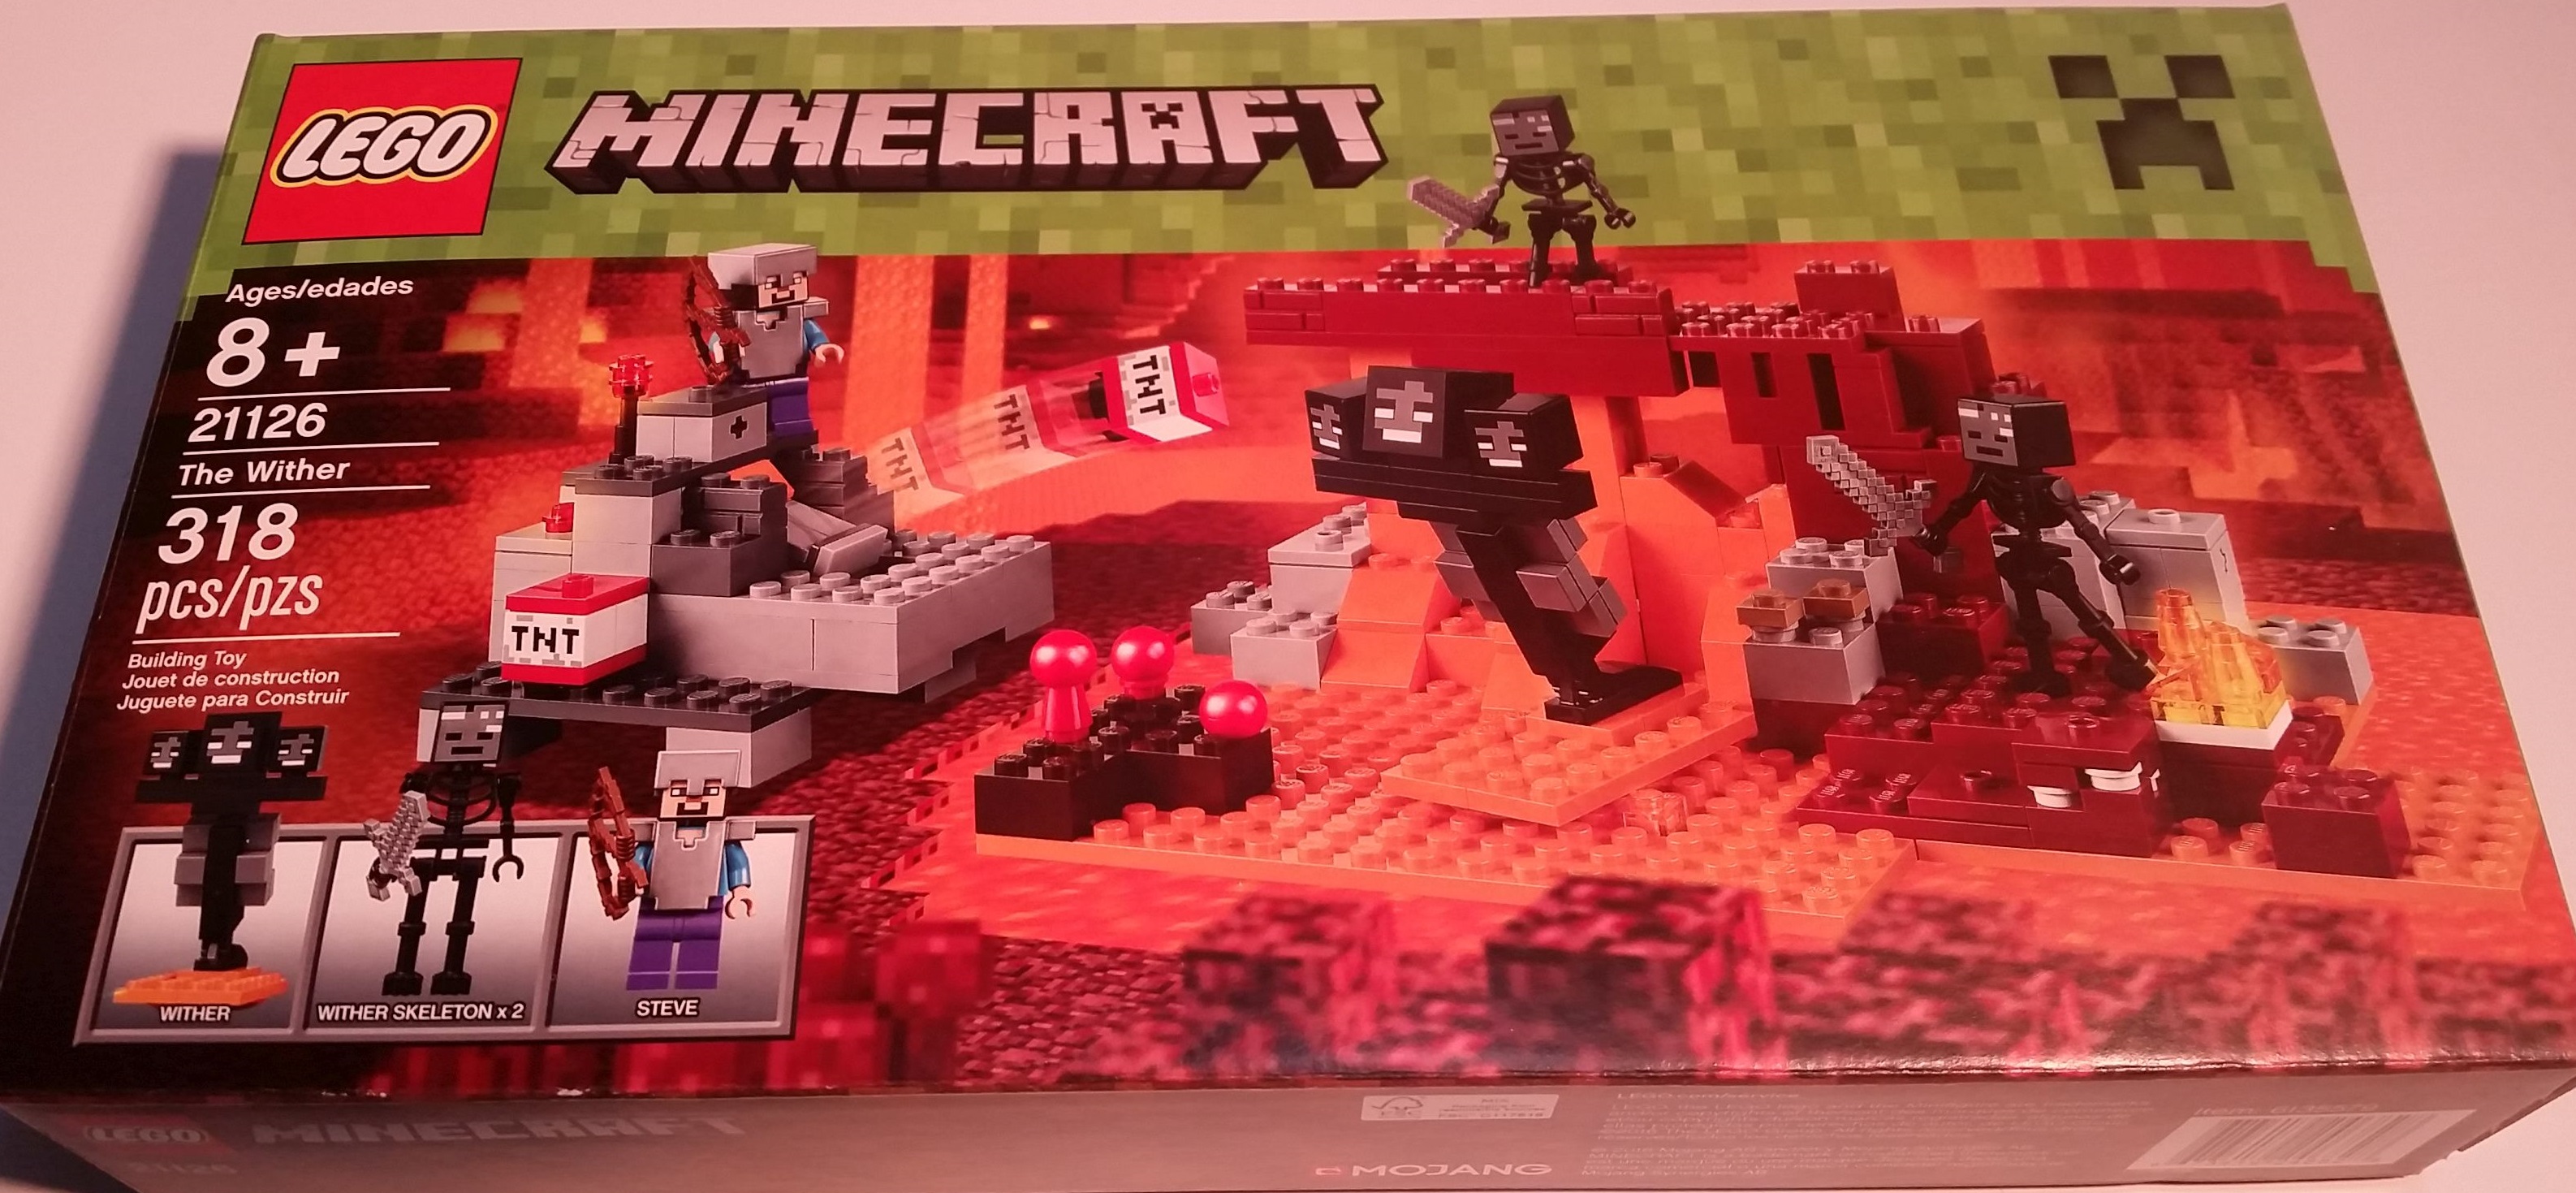 LEGO Minecraft 21126 The Wither Building Toy 2 Wither skeletons, and Steve.